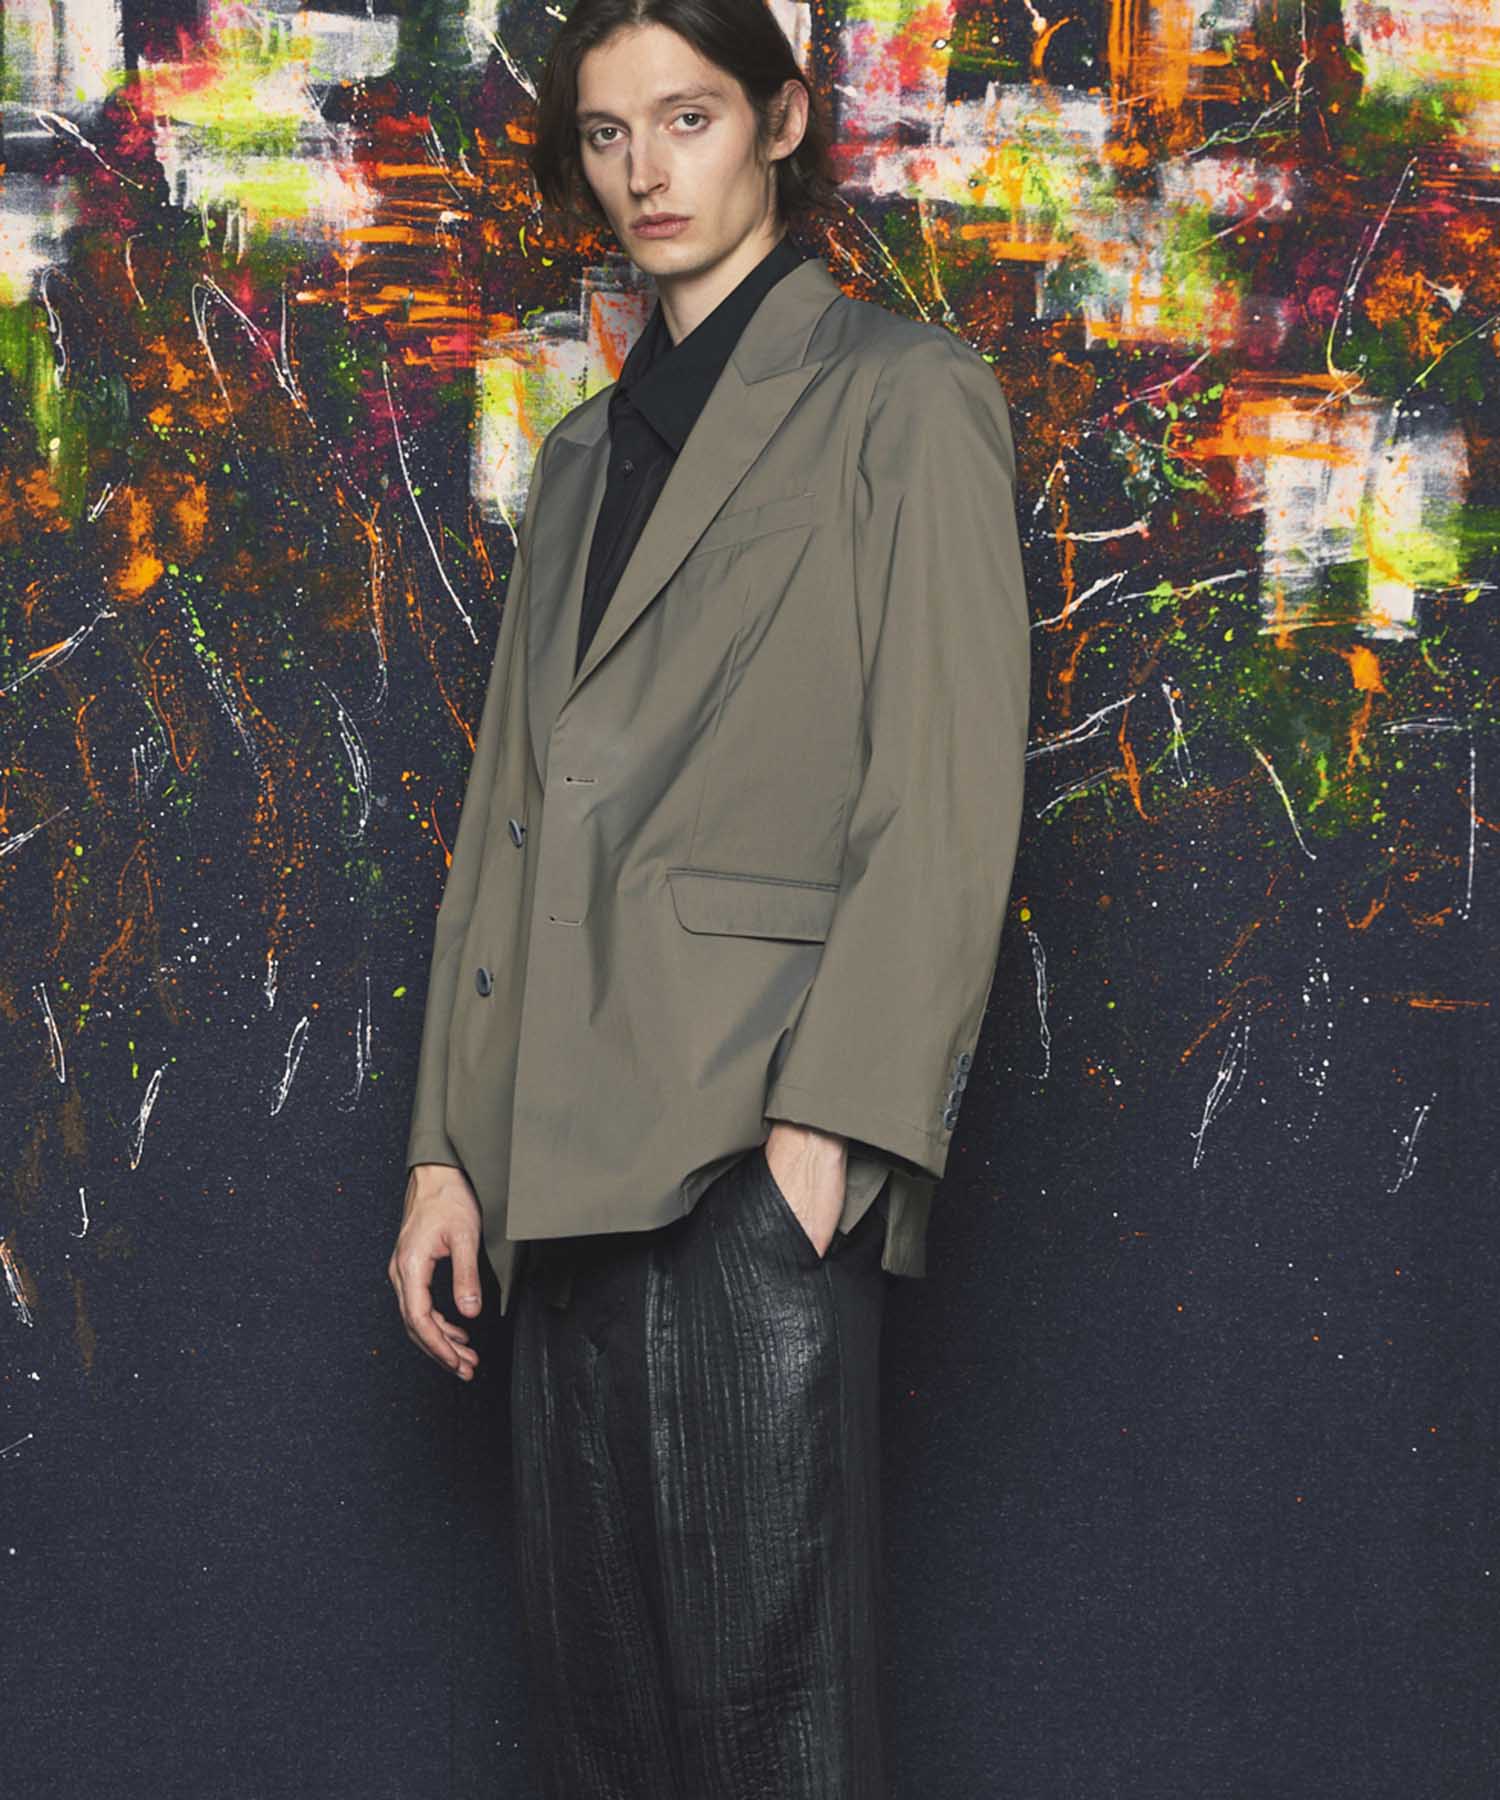 【LIMITED EDITION】Dress-Over Peaked Lapel Semi-Double Tailored Jacket